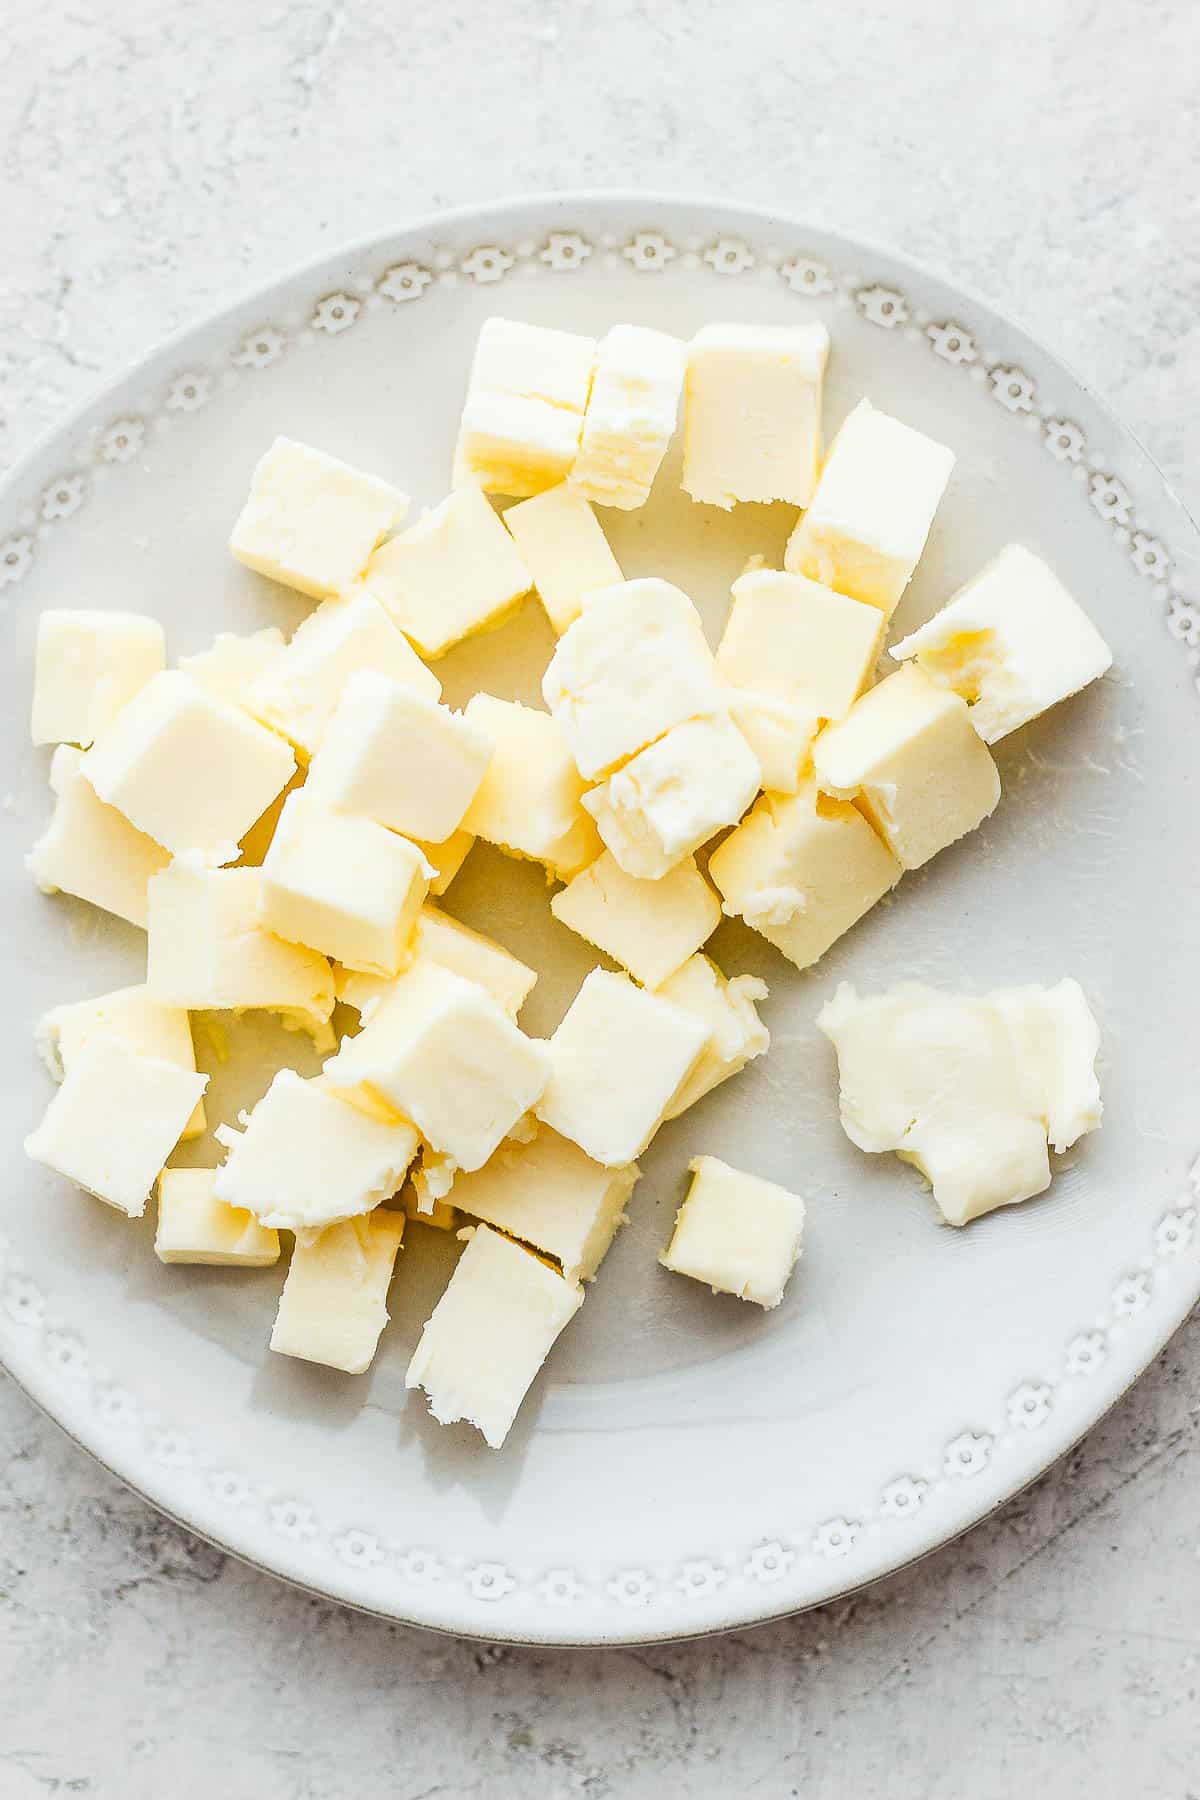 Cubed butter softened on a plate